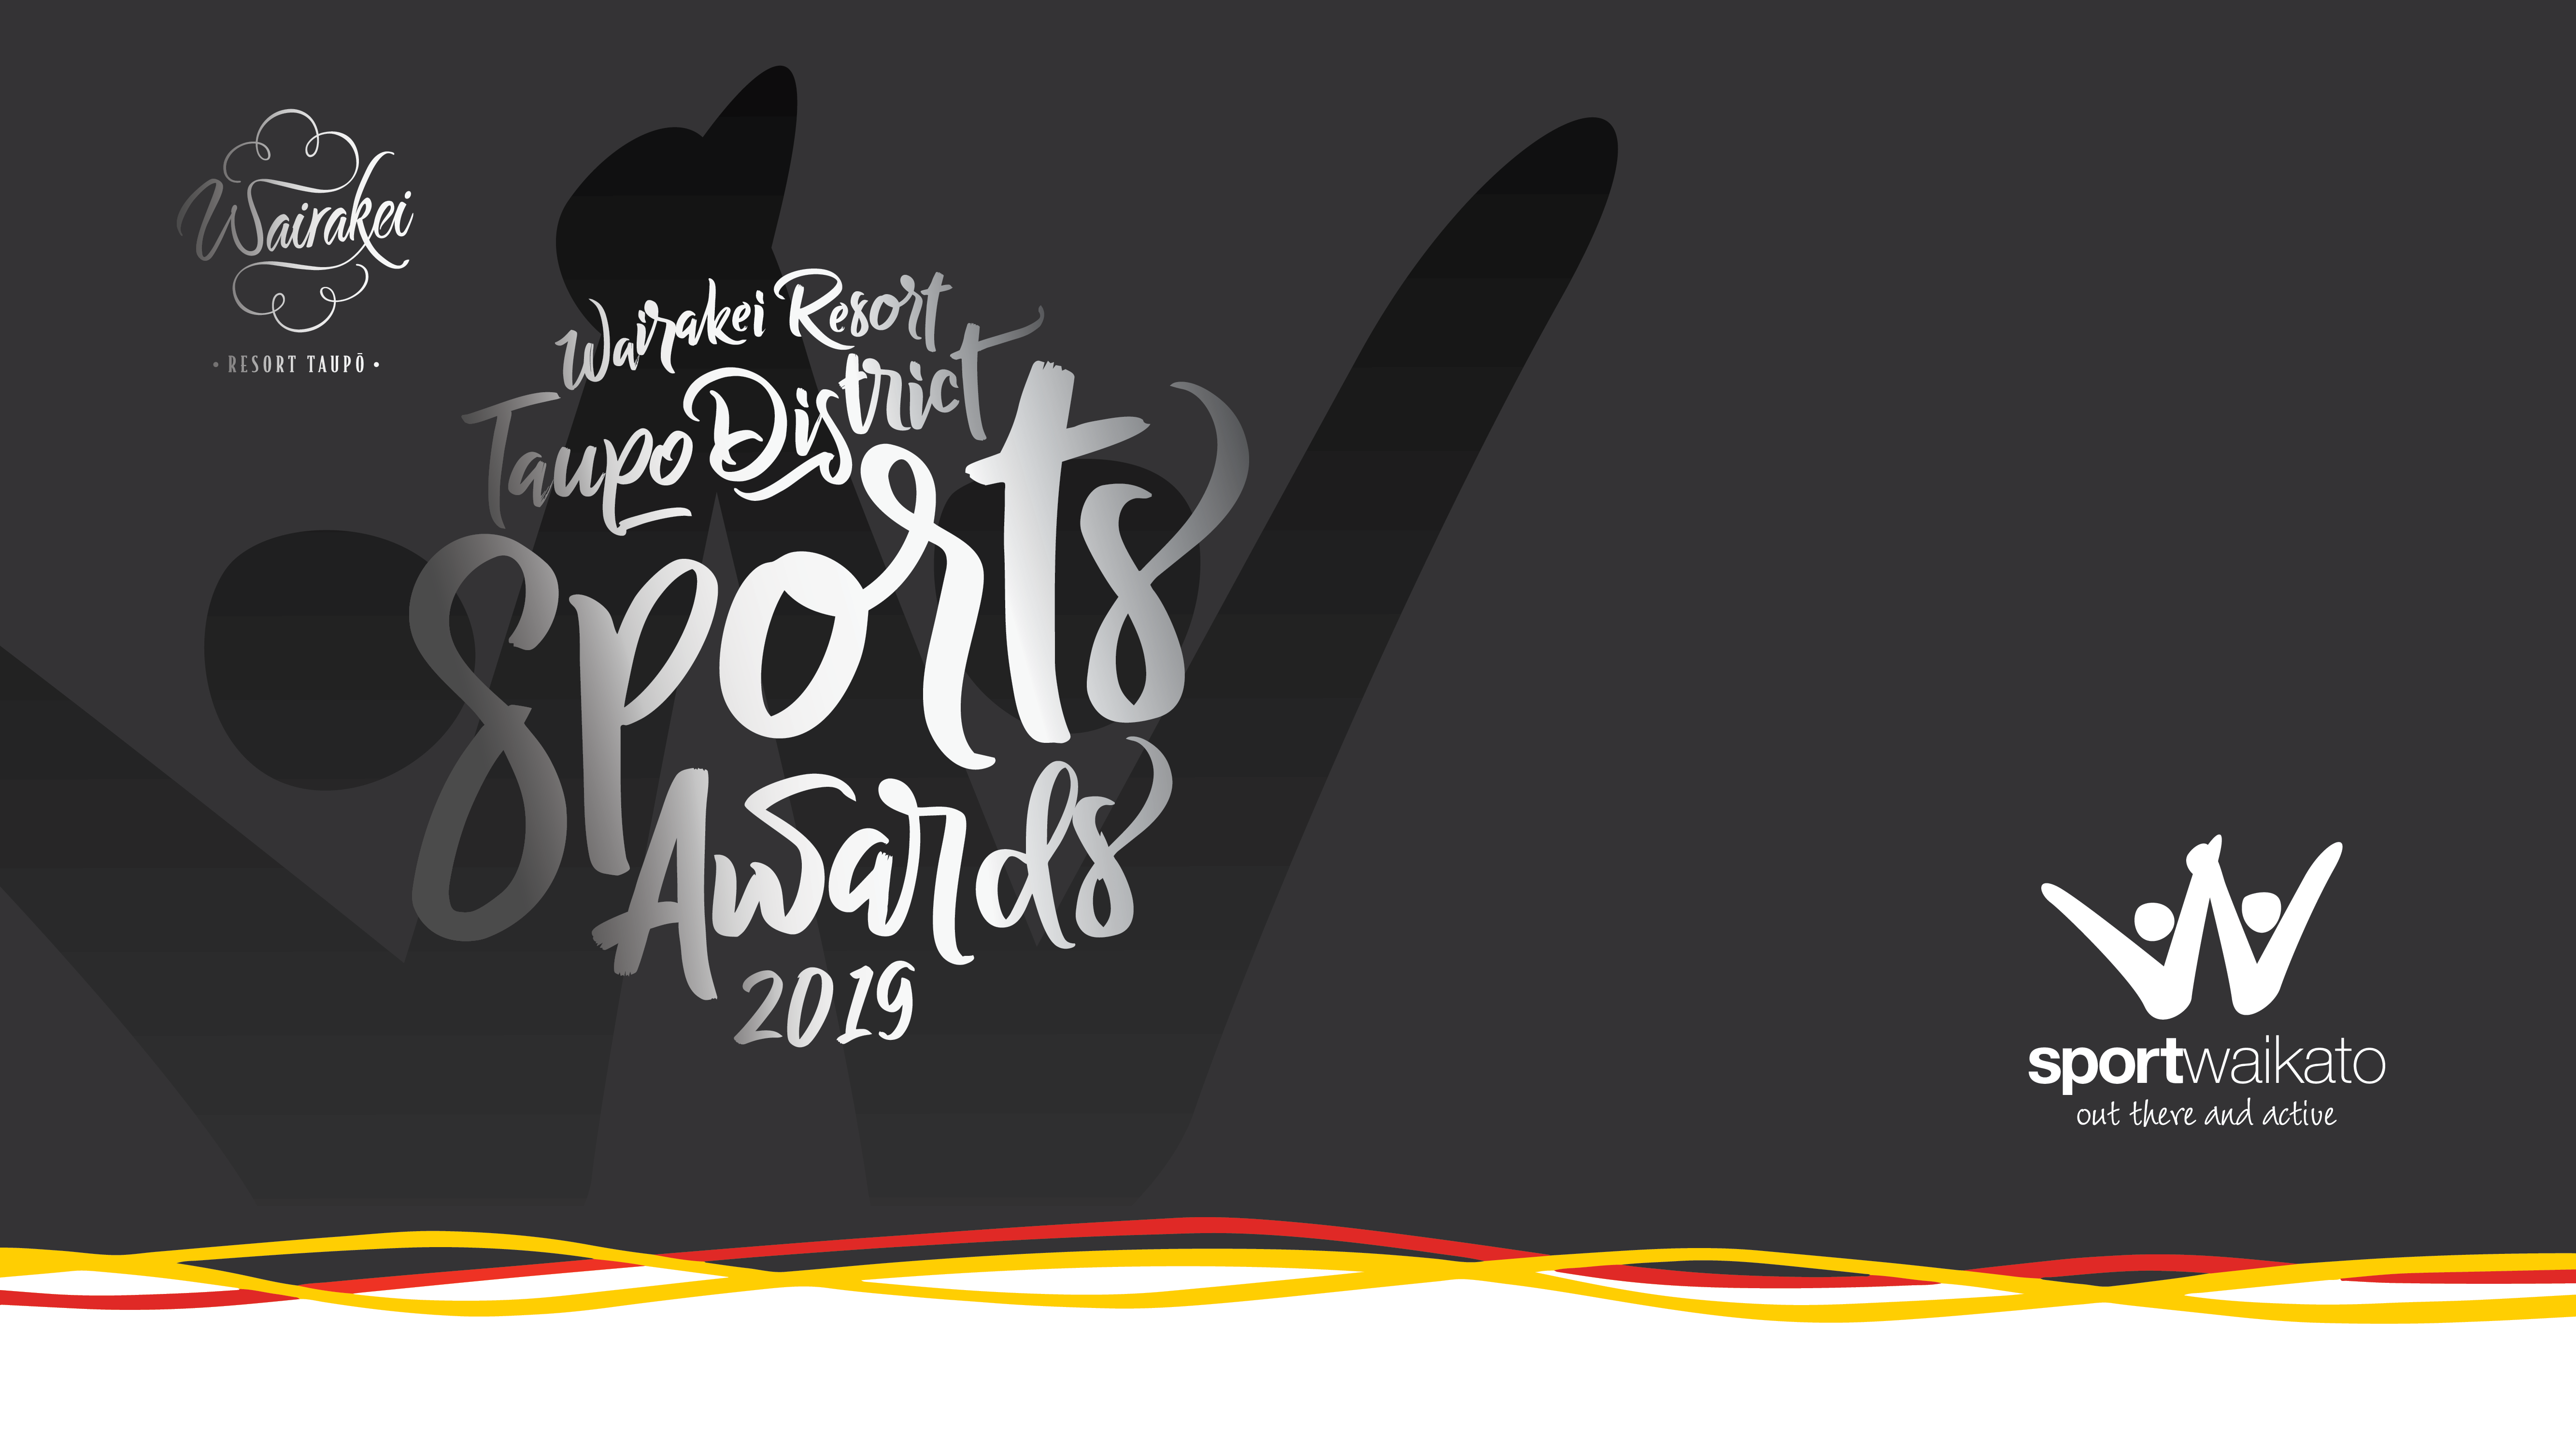 Wairakei Resort Taupo District Sports Awards 2019 nominations are in!